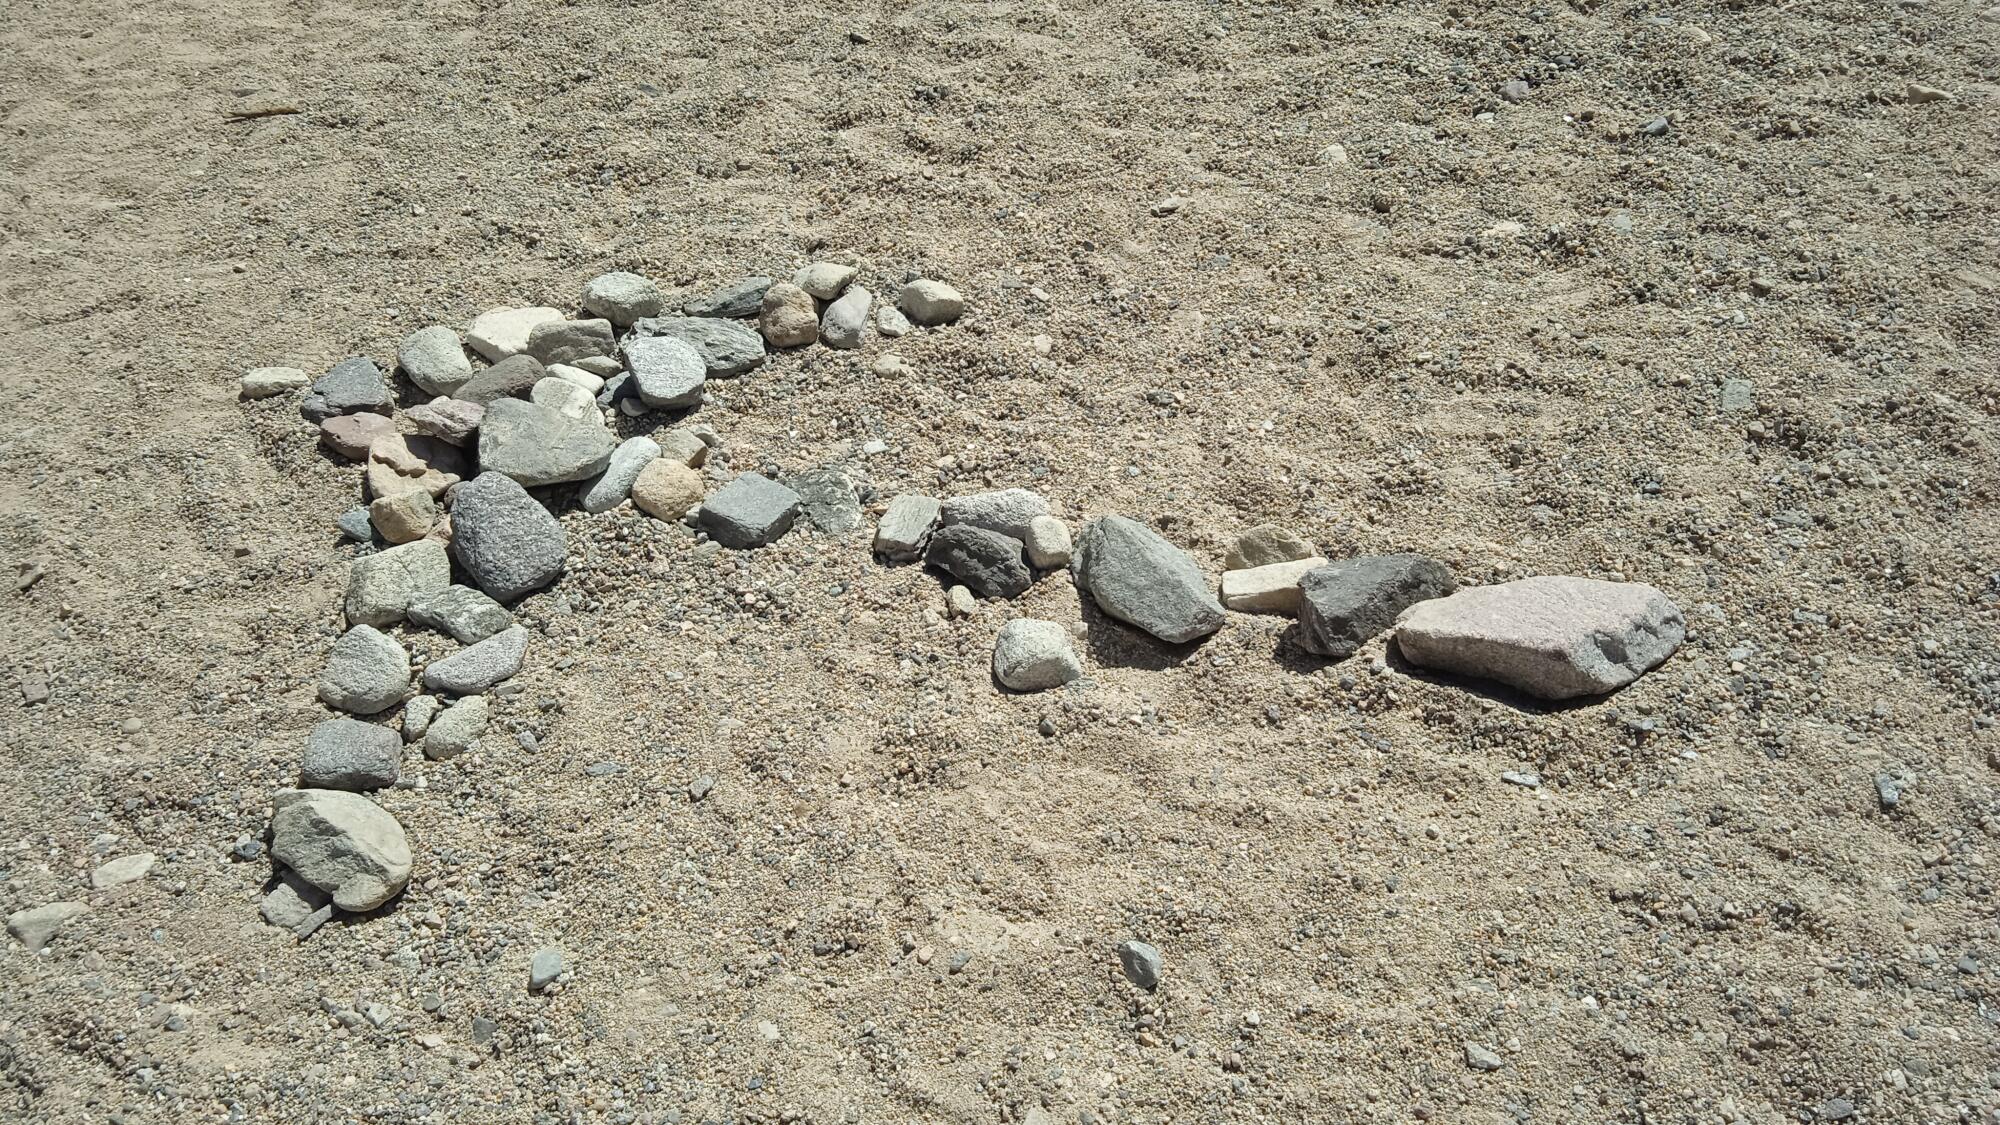 An arrow made of stones rests in the desert sand